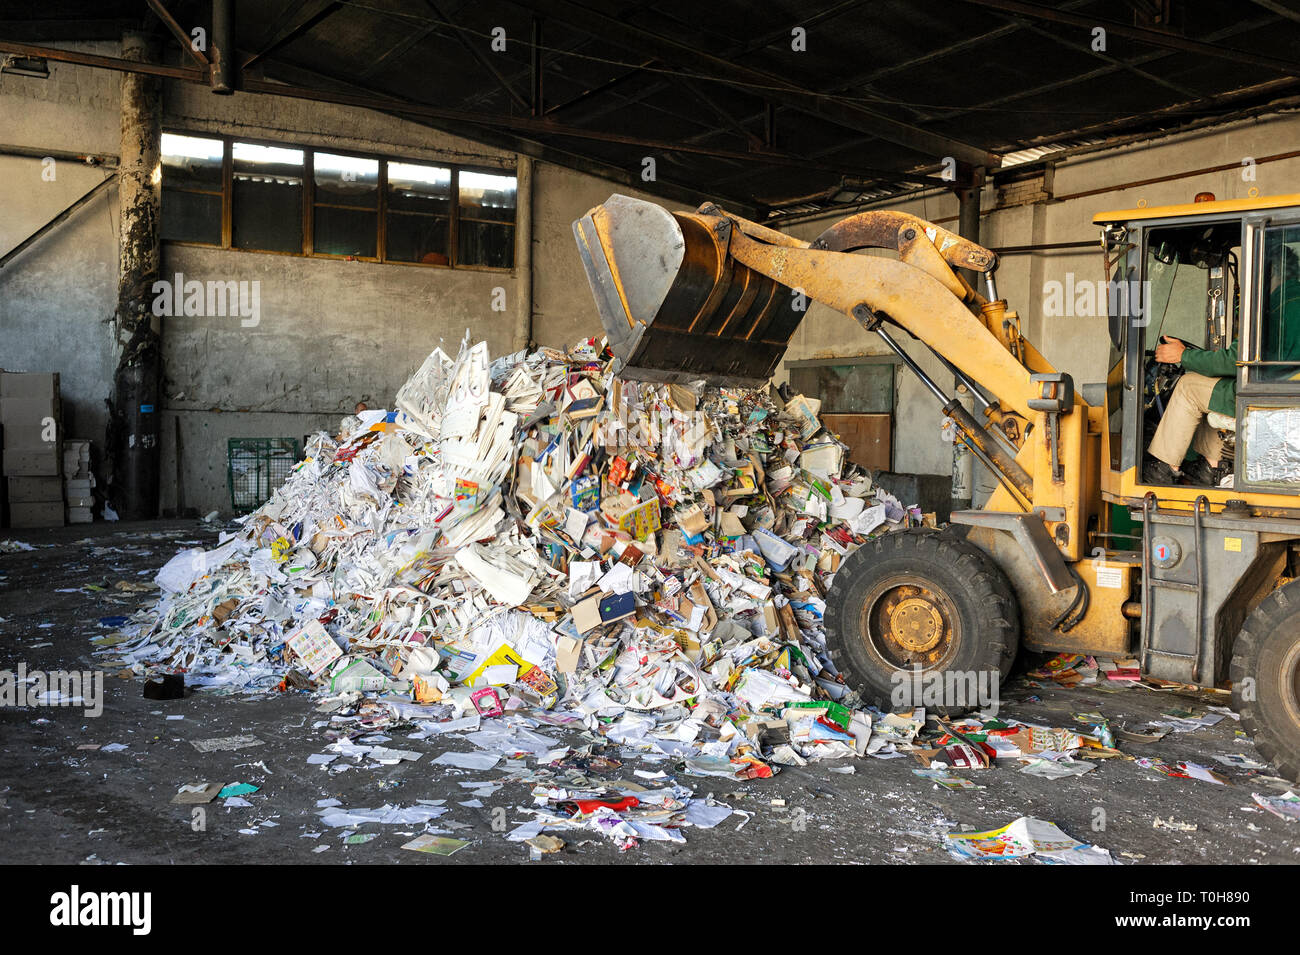 Yellow Excavator Dumps Hundreds Papers And Books. At The Recycling Plant Excavator Throws Out Paper Trash. Kyiv, Ukraine, Kyivmyskvtorresursy Plant (K Stock Photo